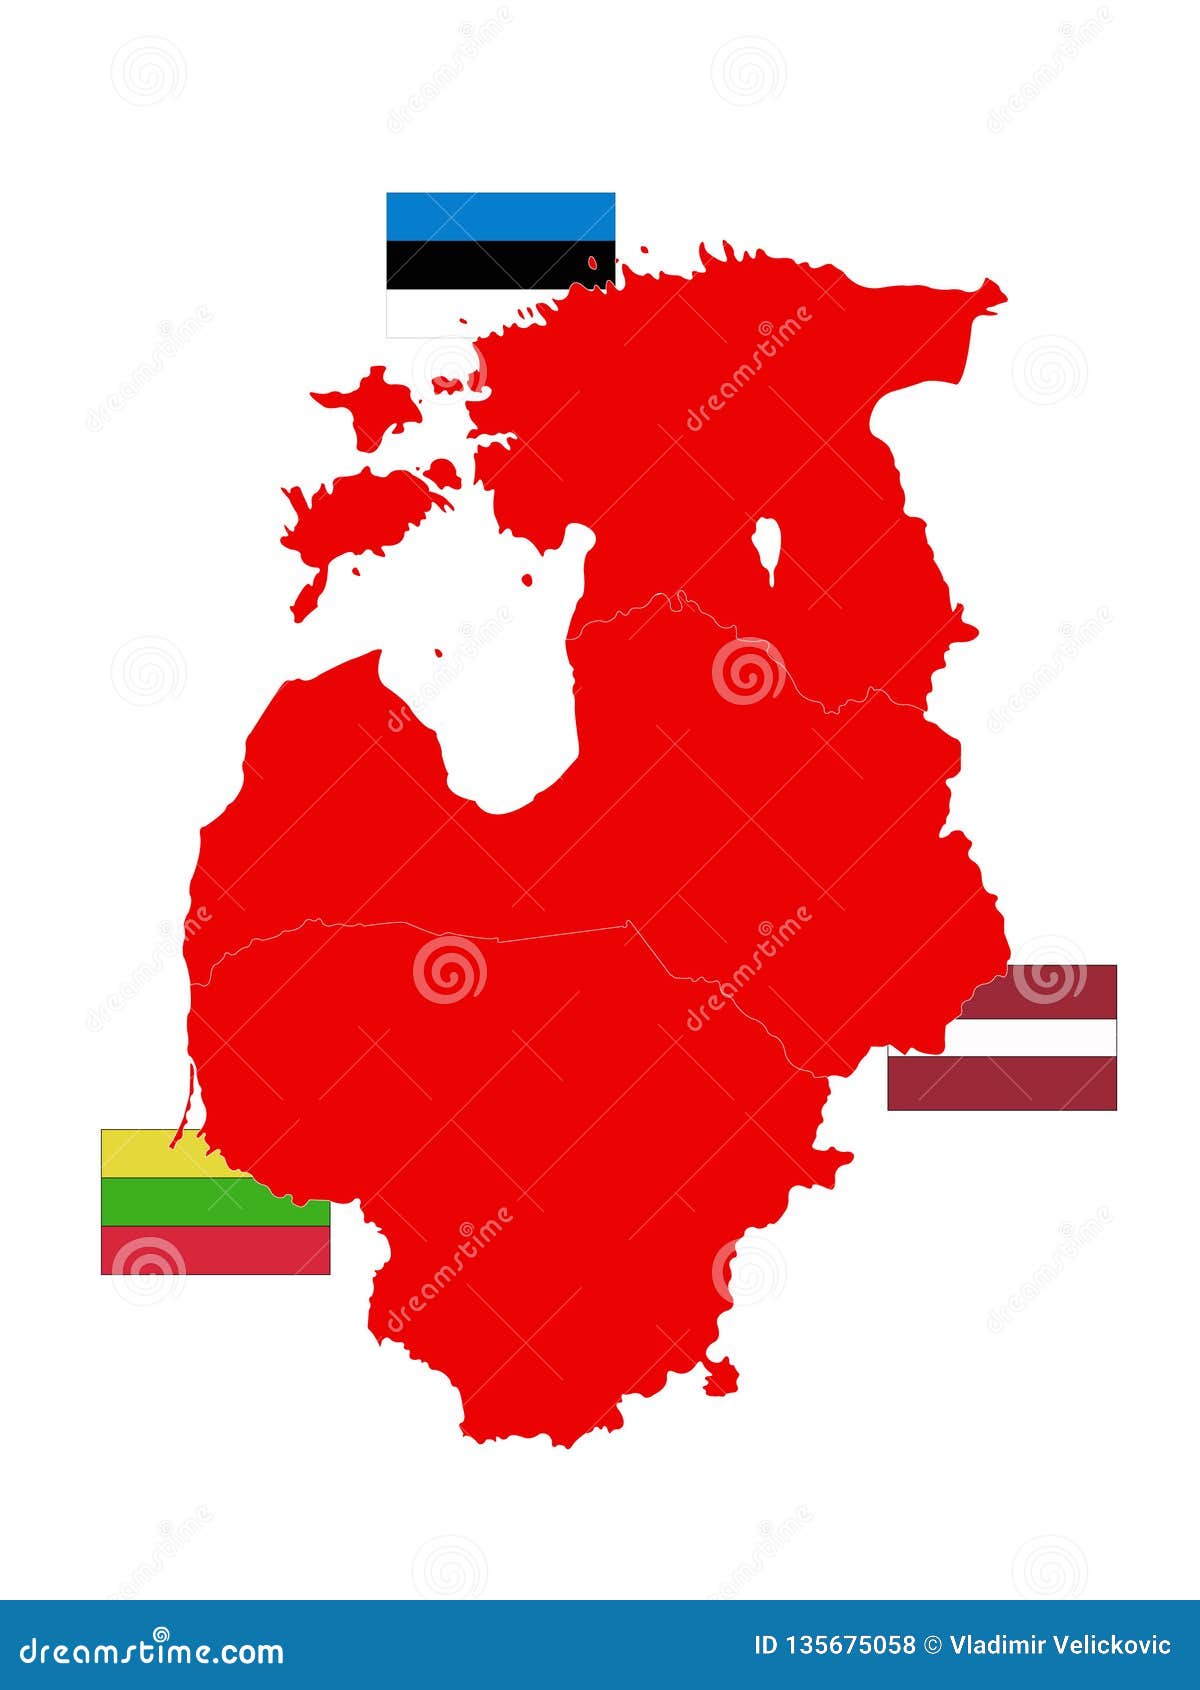 Baltic Countries Map With Flags Baltic States Baltic Republics